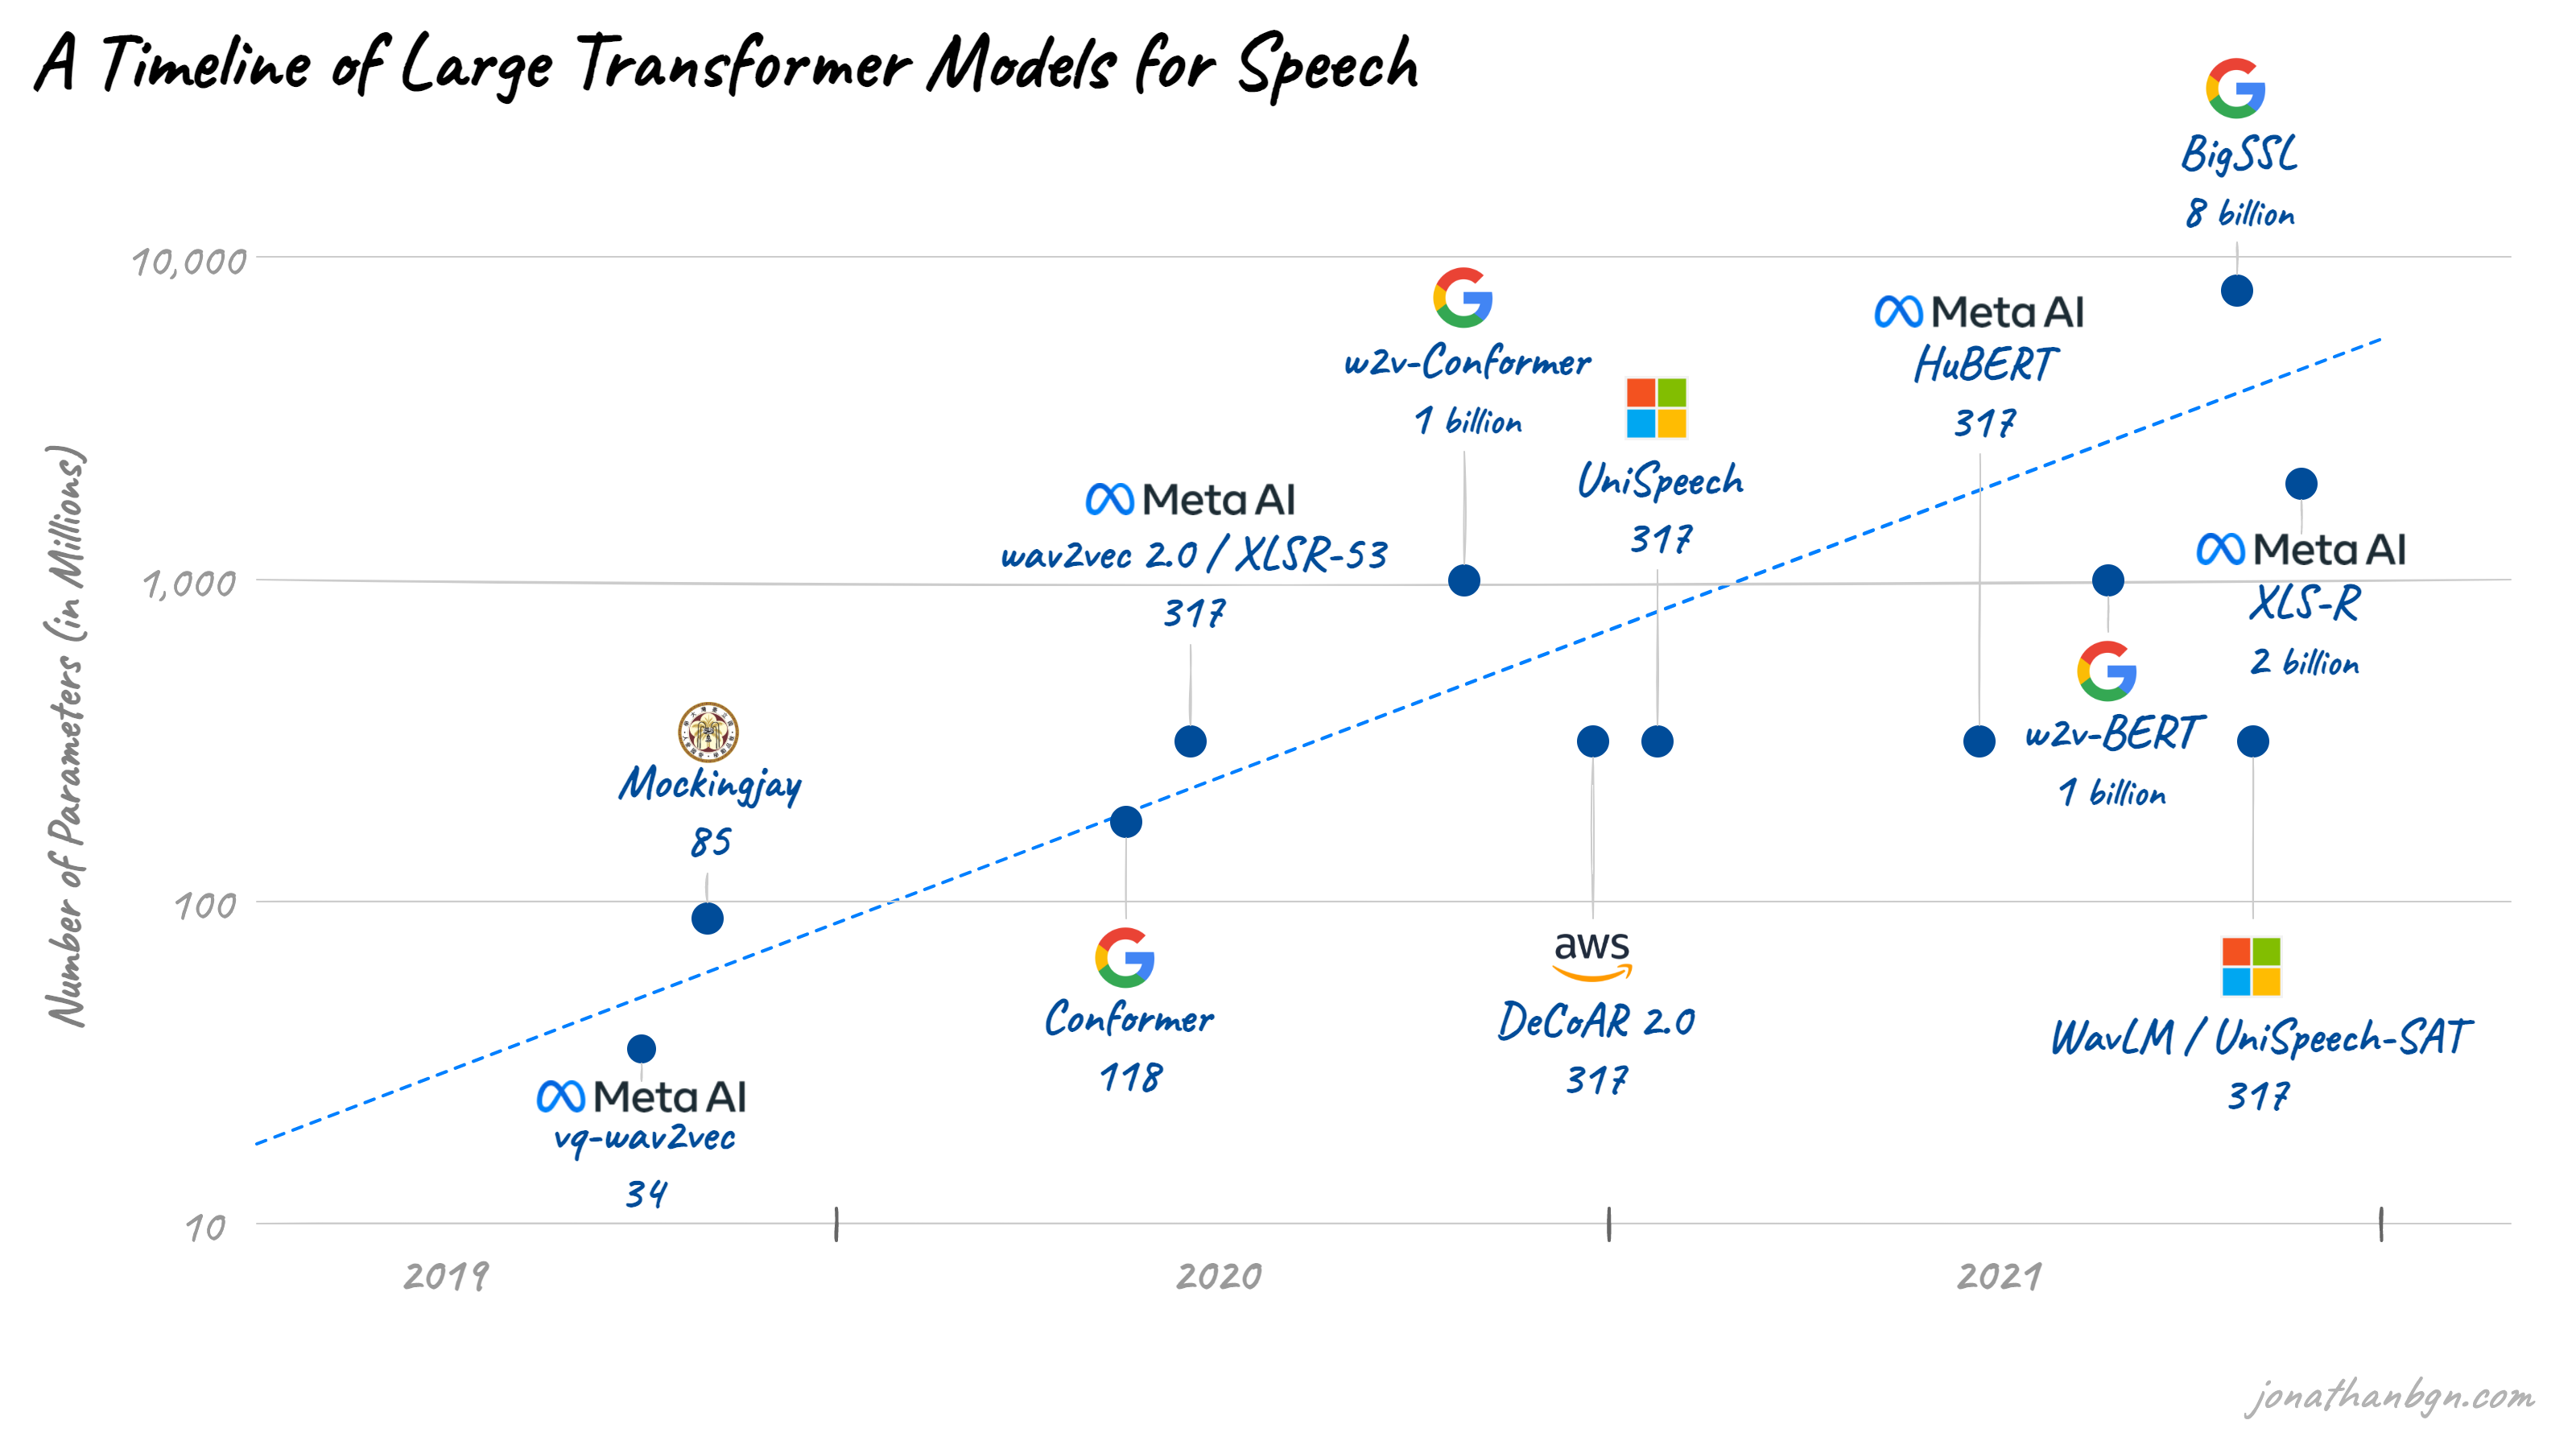 A Timeline of Transformers for Speech